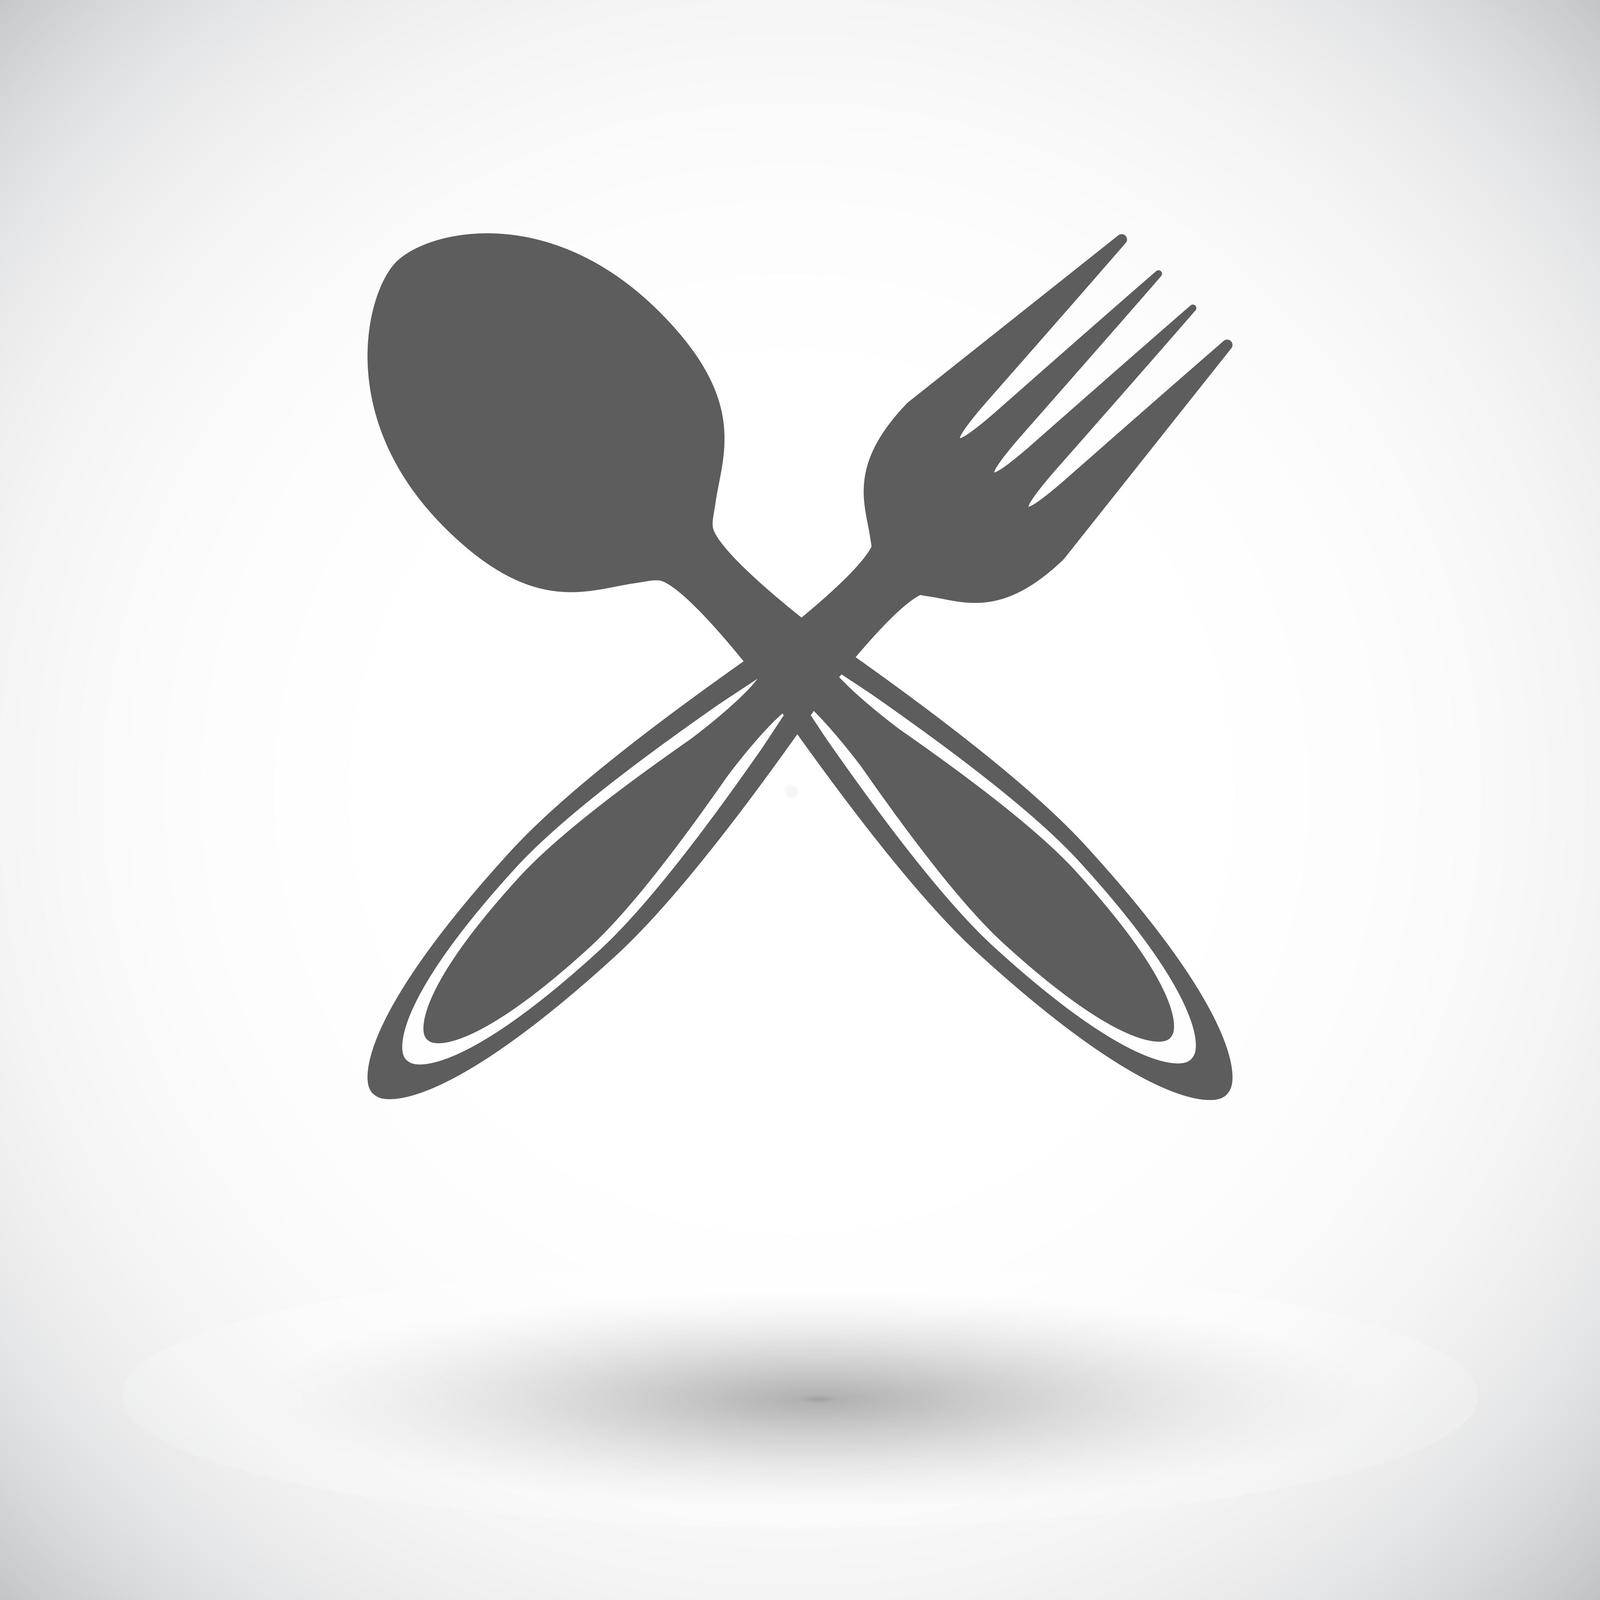 Knife and fork. Single flat icon on white background. Vector illustration.